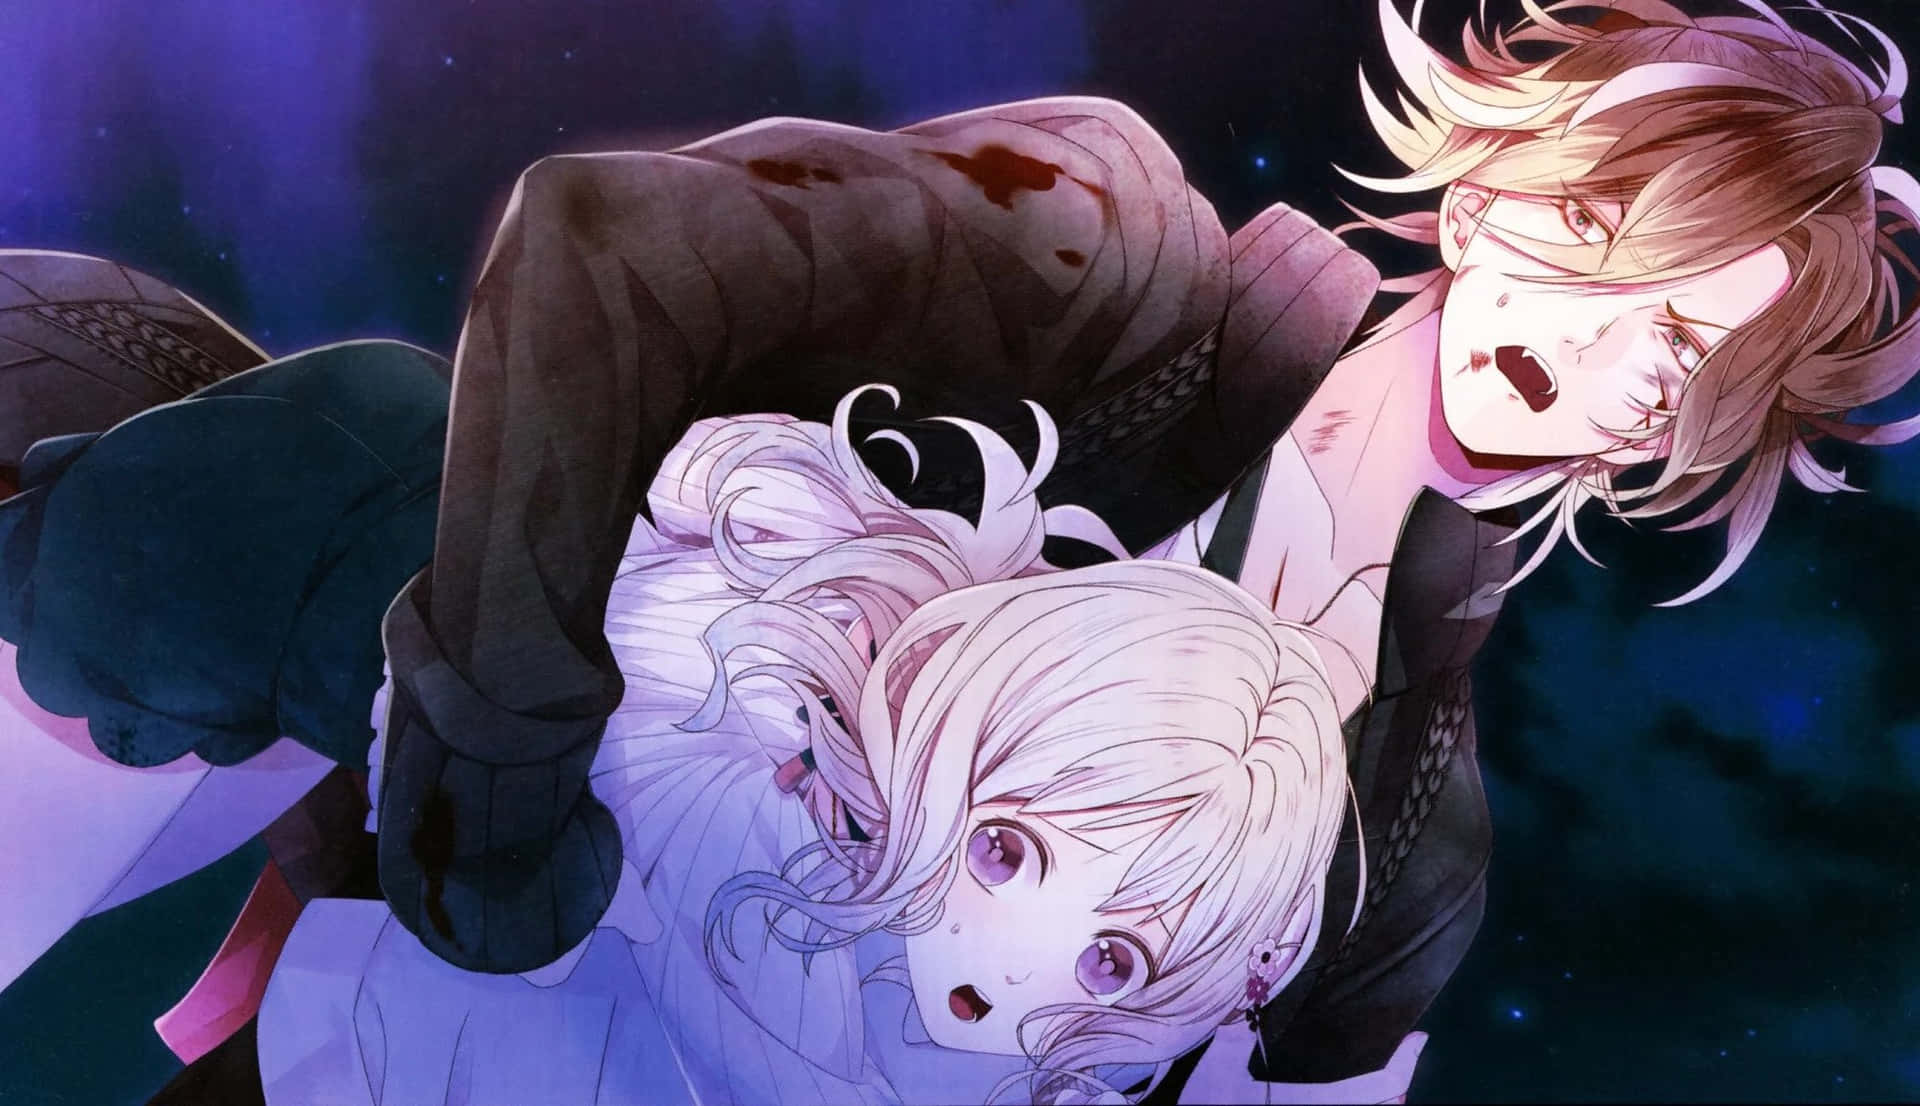 “Journey into the dark and tumultuous world of Diabolik Lovers!”